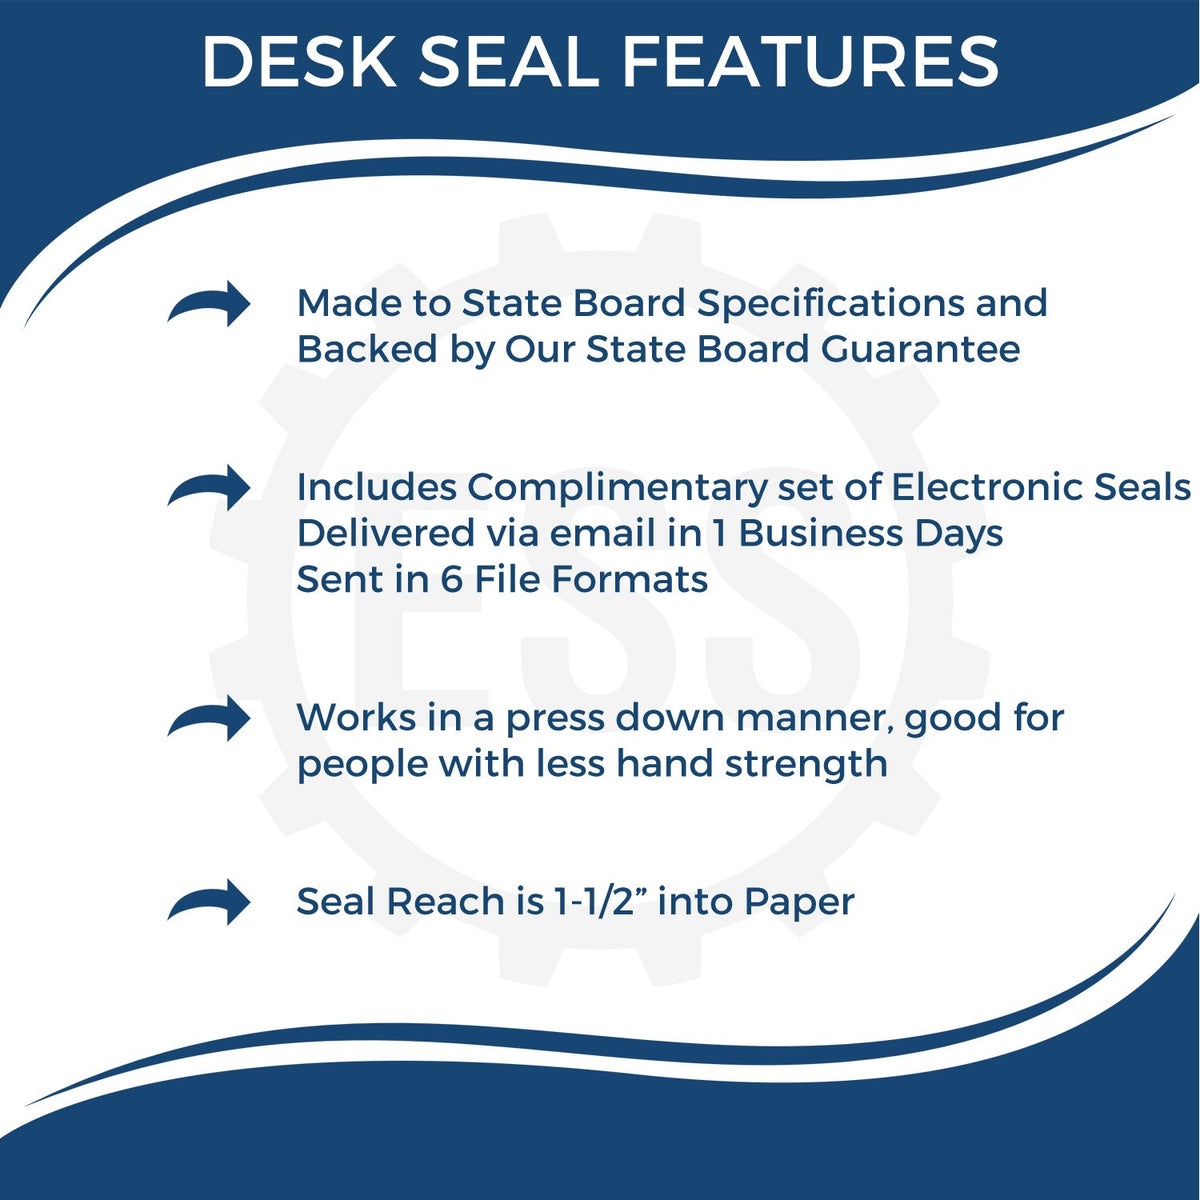 A picture of an infographic highlighting the selling points for the Kentucky Desk Architect Embossing Seal